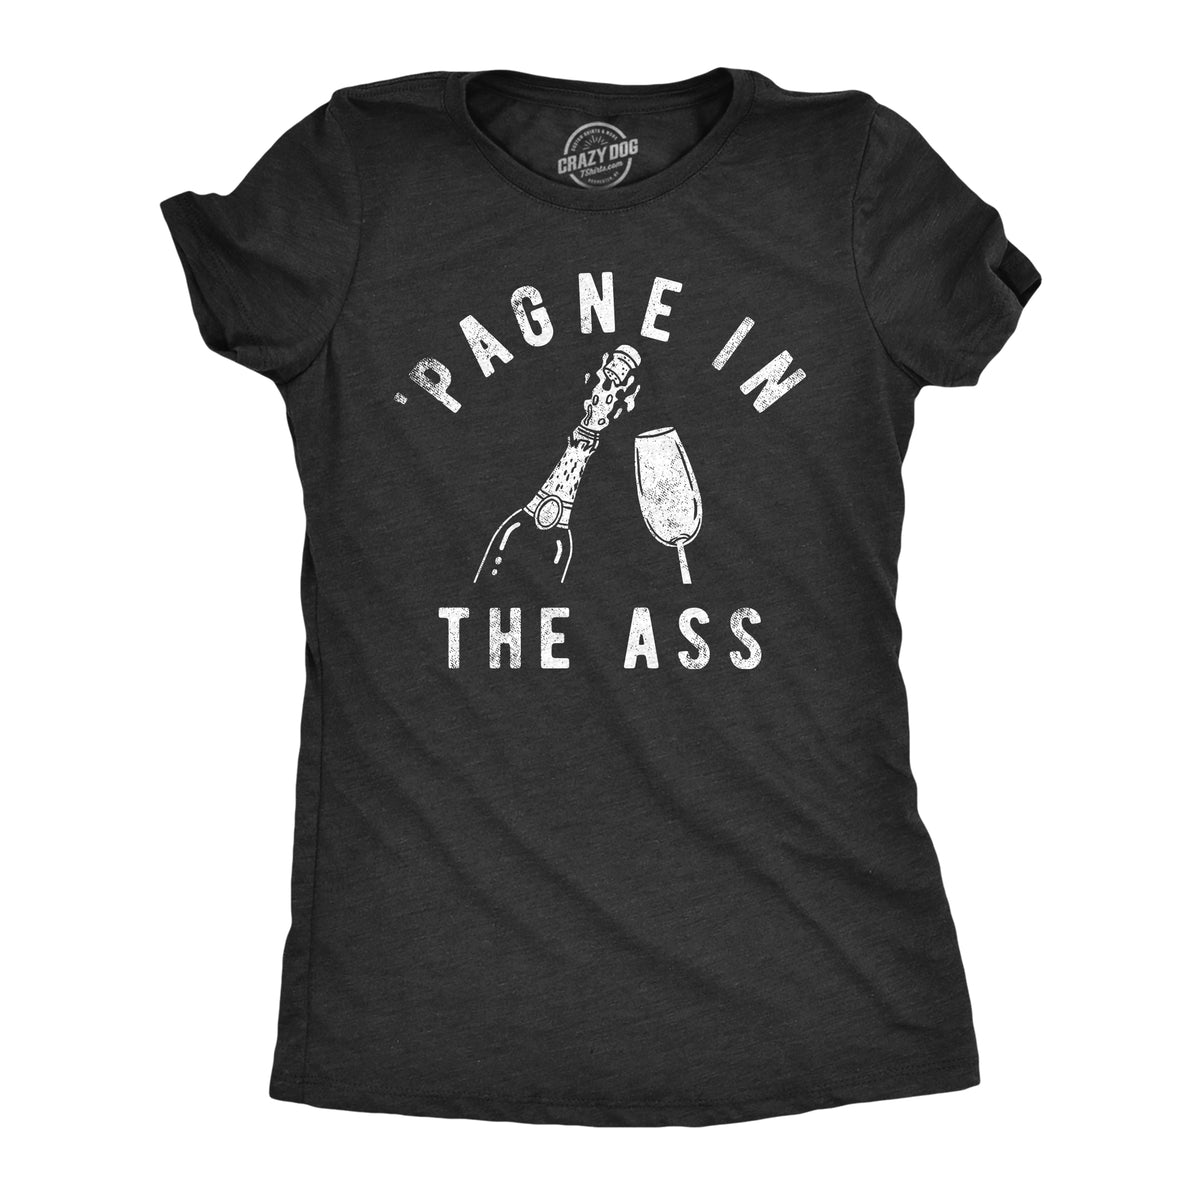 Funny Heather Black - PAGNE Pagne In The Ass Womens T Shirt Nerdy New Years Drinking sarcastic Tee